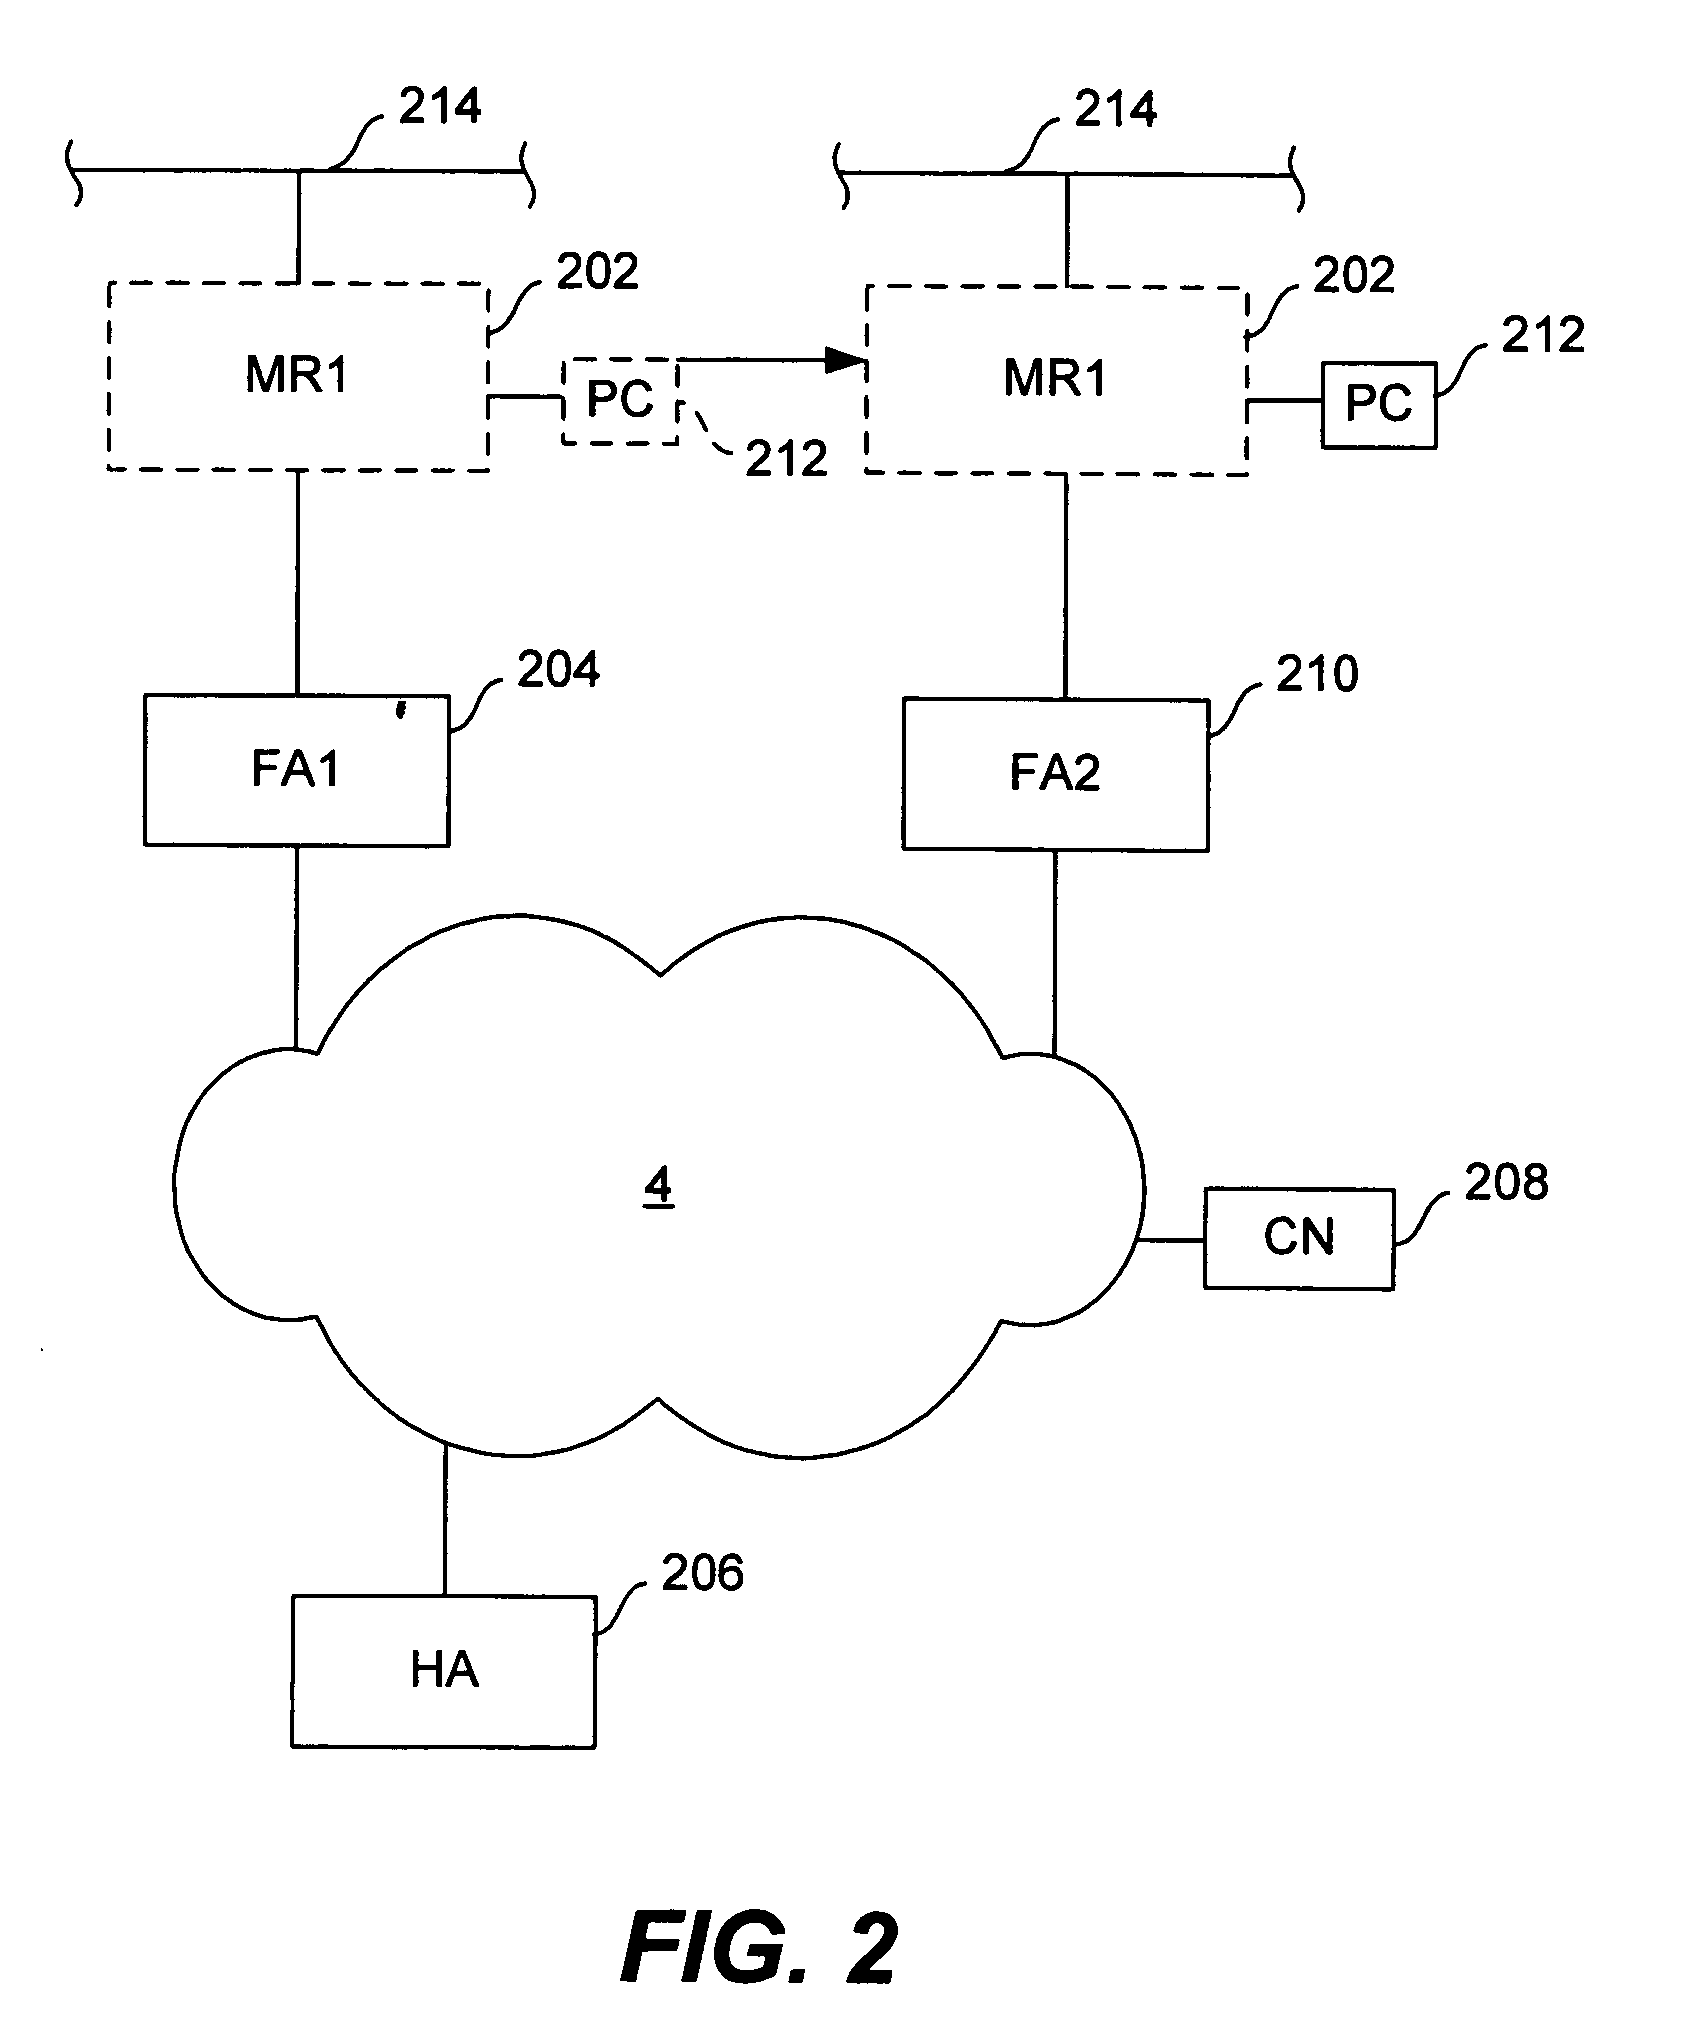 Dynamic network allocation for mobile router